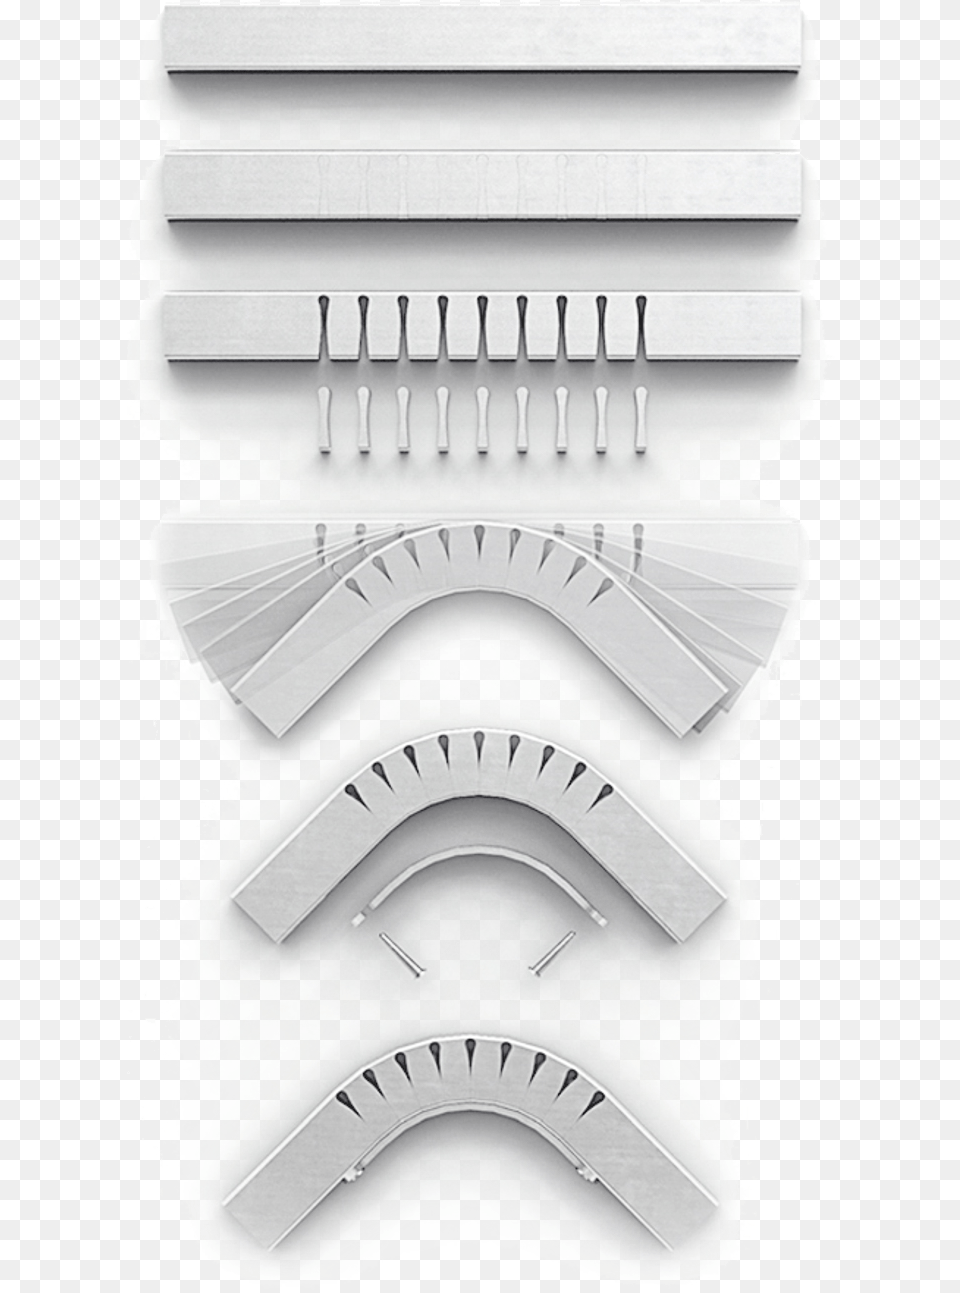 Cutwork Industrial Tech, Architecture, Building, Cutlery, Adult Png Image